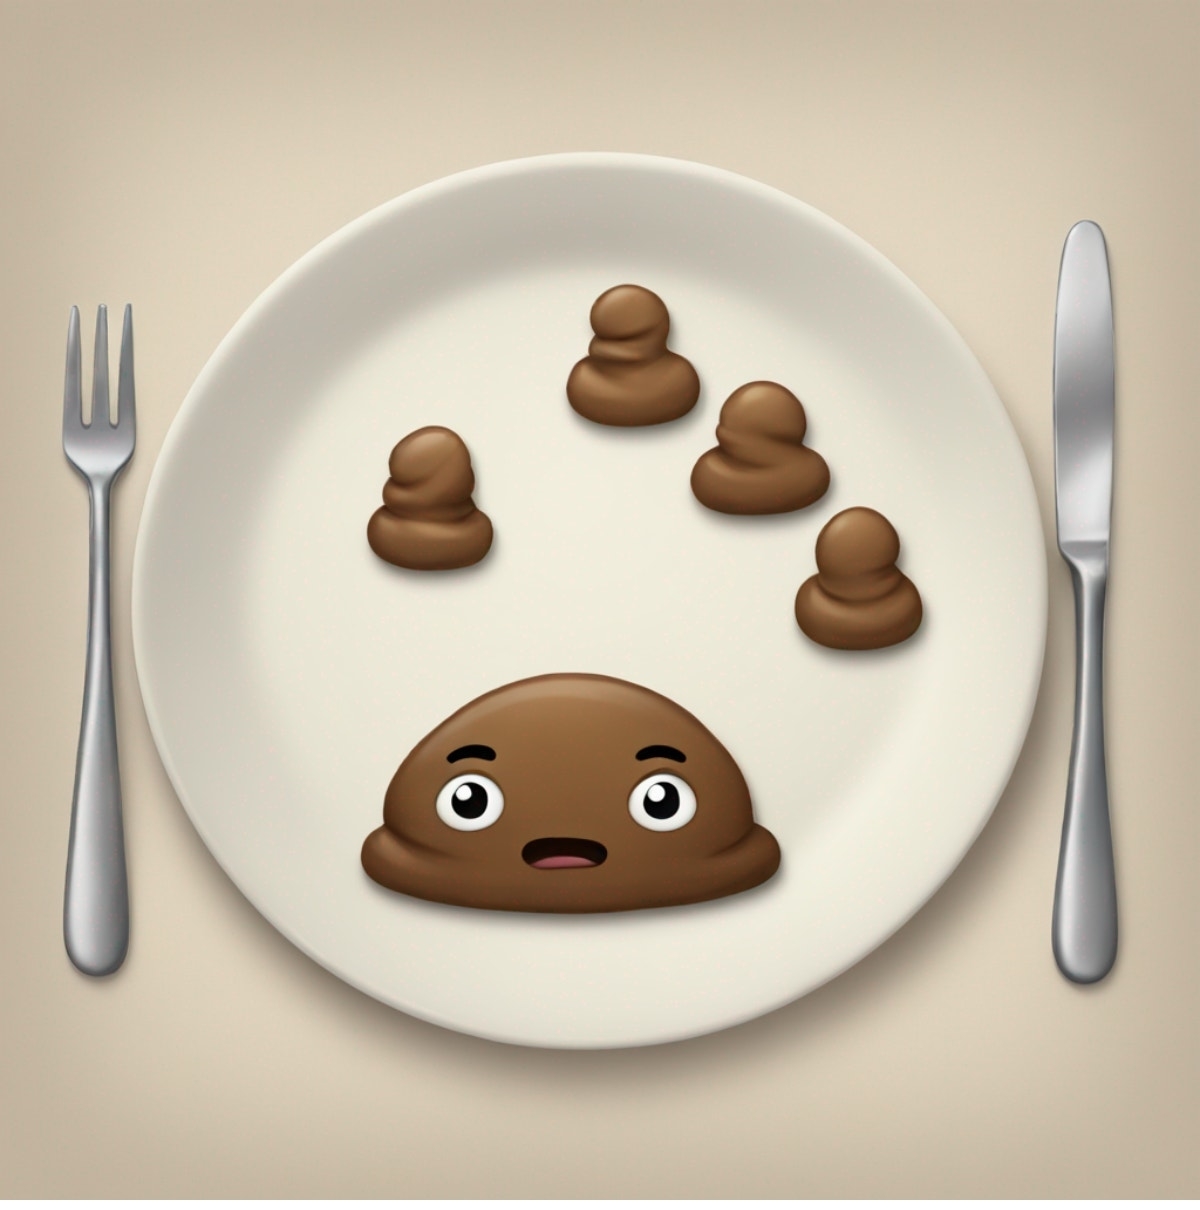 A plate with emoji-style poop figures, one with a face, between a fork and knife